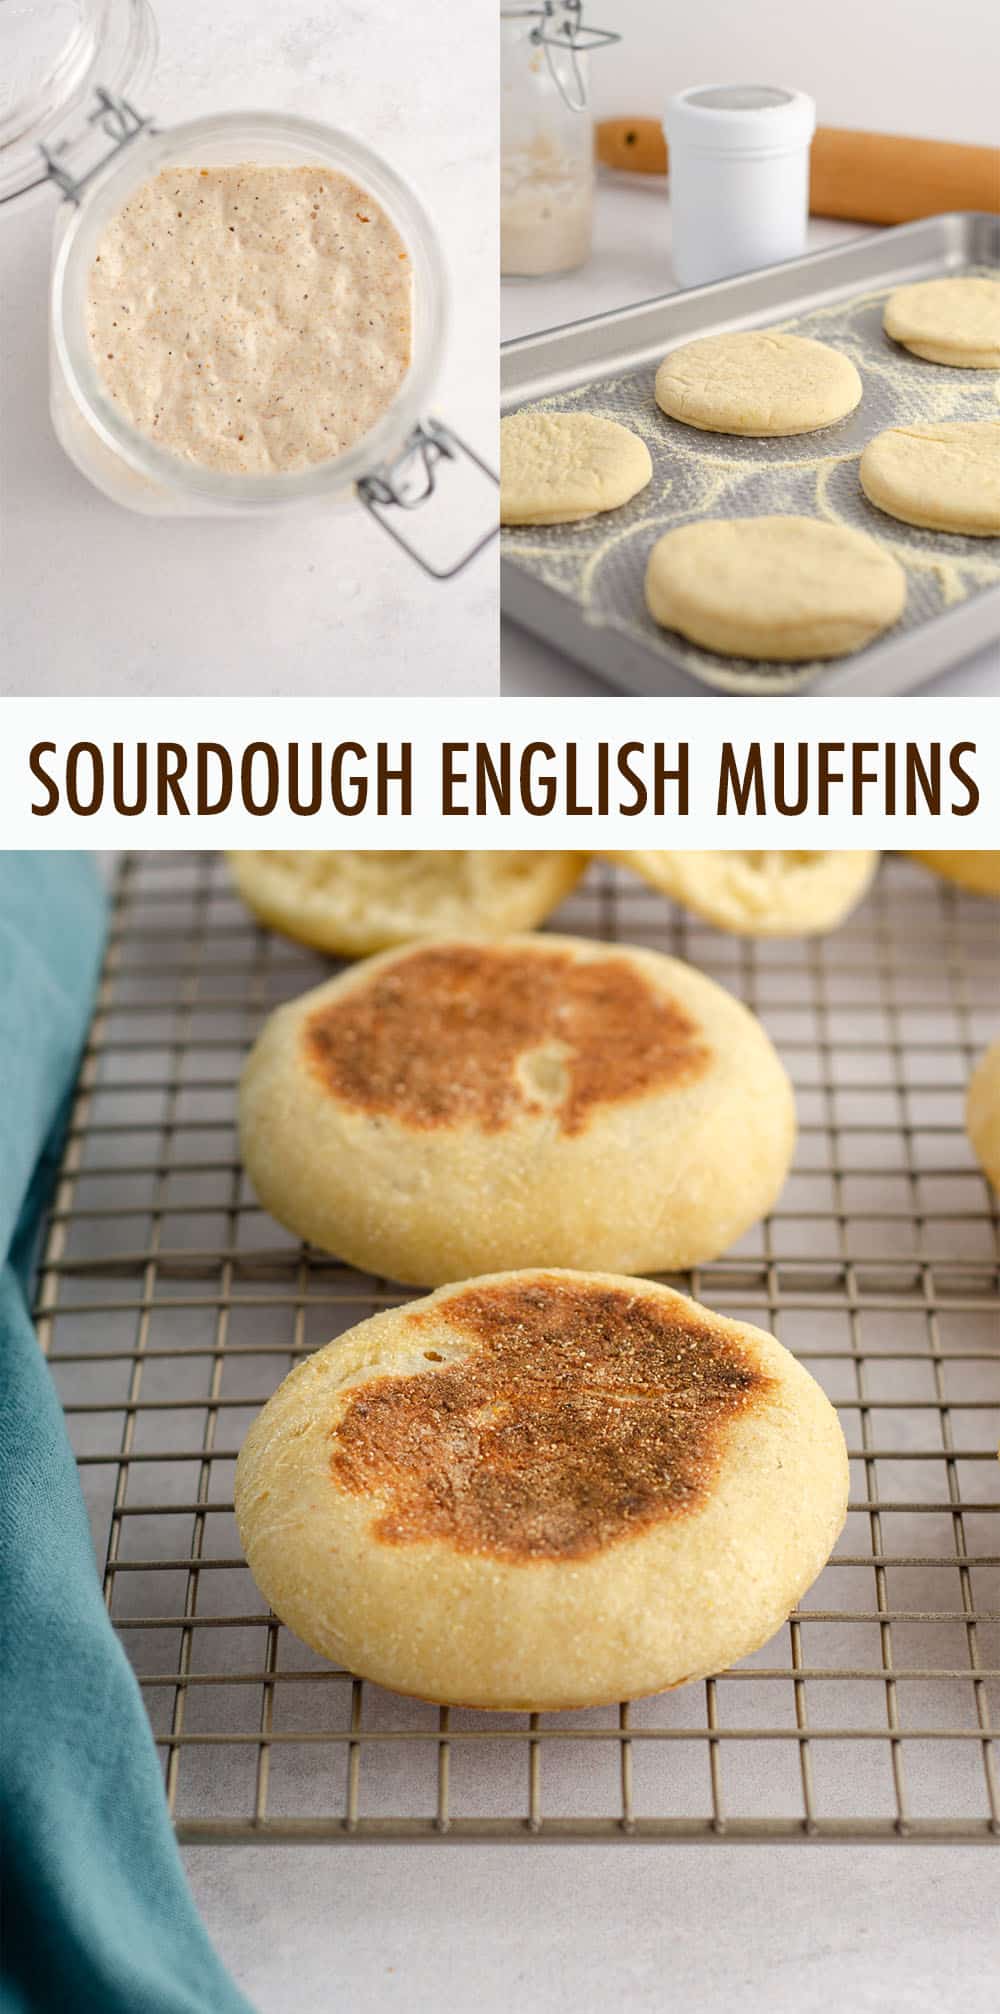 Put that sourdough starter to good use and make your own sourdough English muffins from scratch, with all the nooks and crannies you love about the store-bought ones! via @frshaprilflours